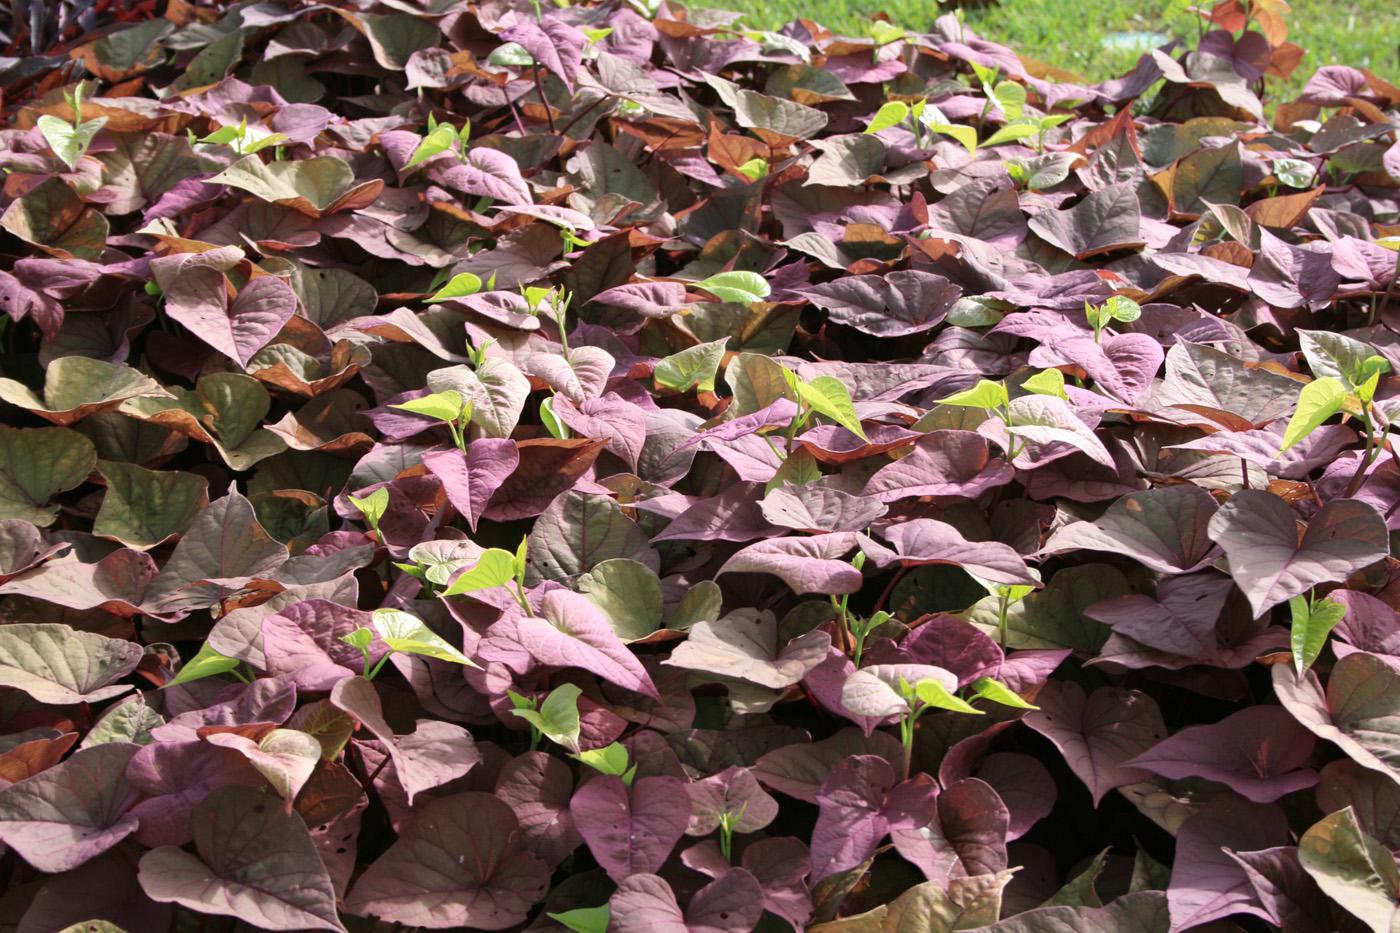 The Sweet Caroline ornamental sweet potato has two leaf shapes, cut-leaf and heart-shaped. Colors include bronze, green-yellow, light green, purple, red and black. (Photo by MSU Extension Service/Gary Bachman)